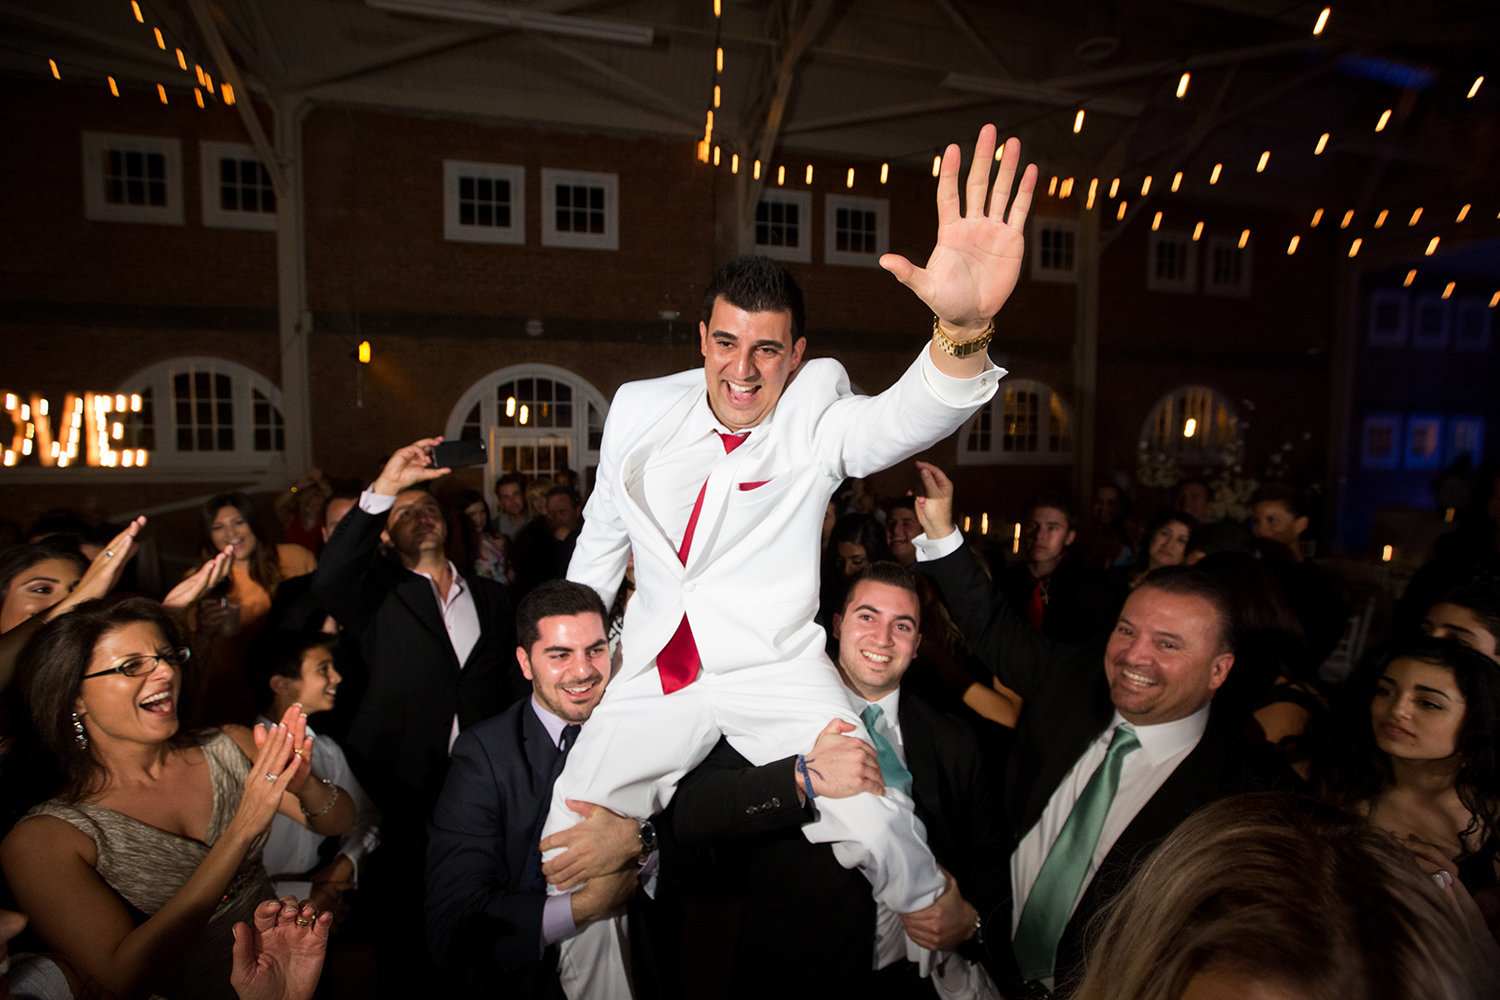 Groom flying high at the wedding reception